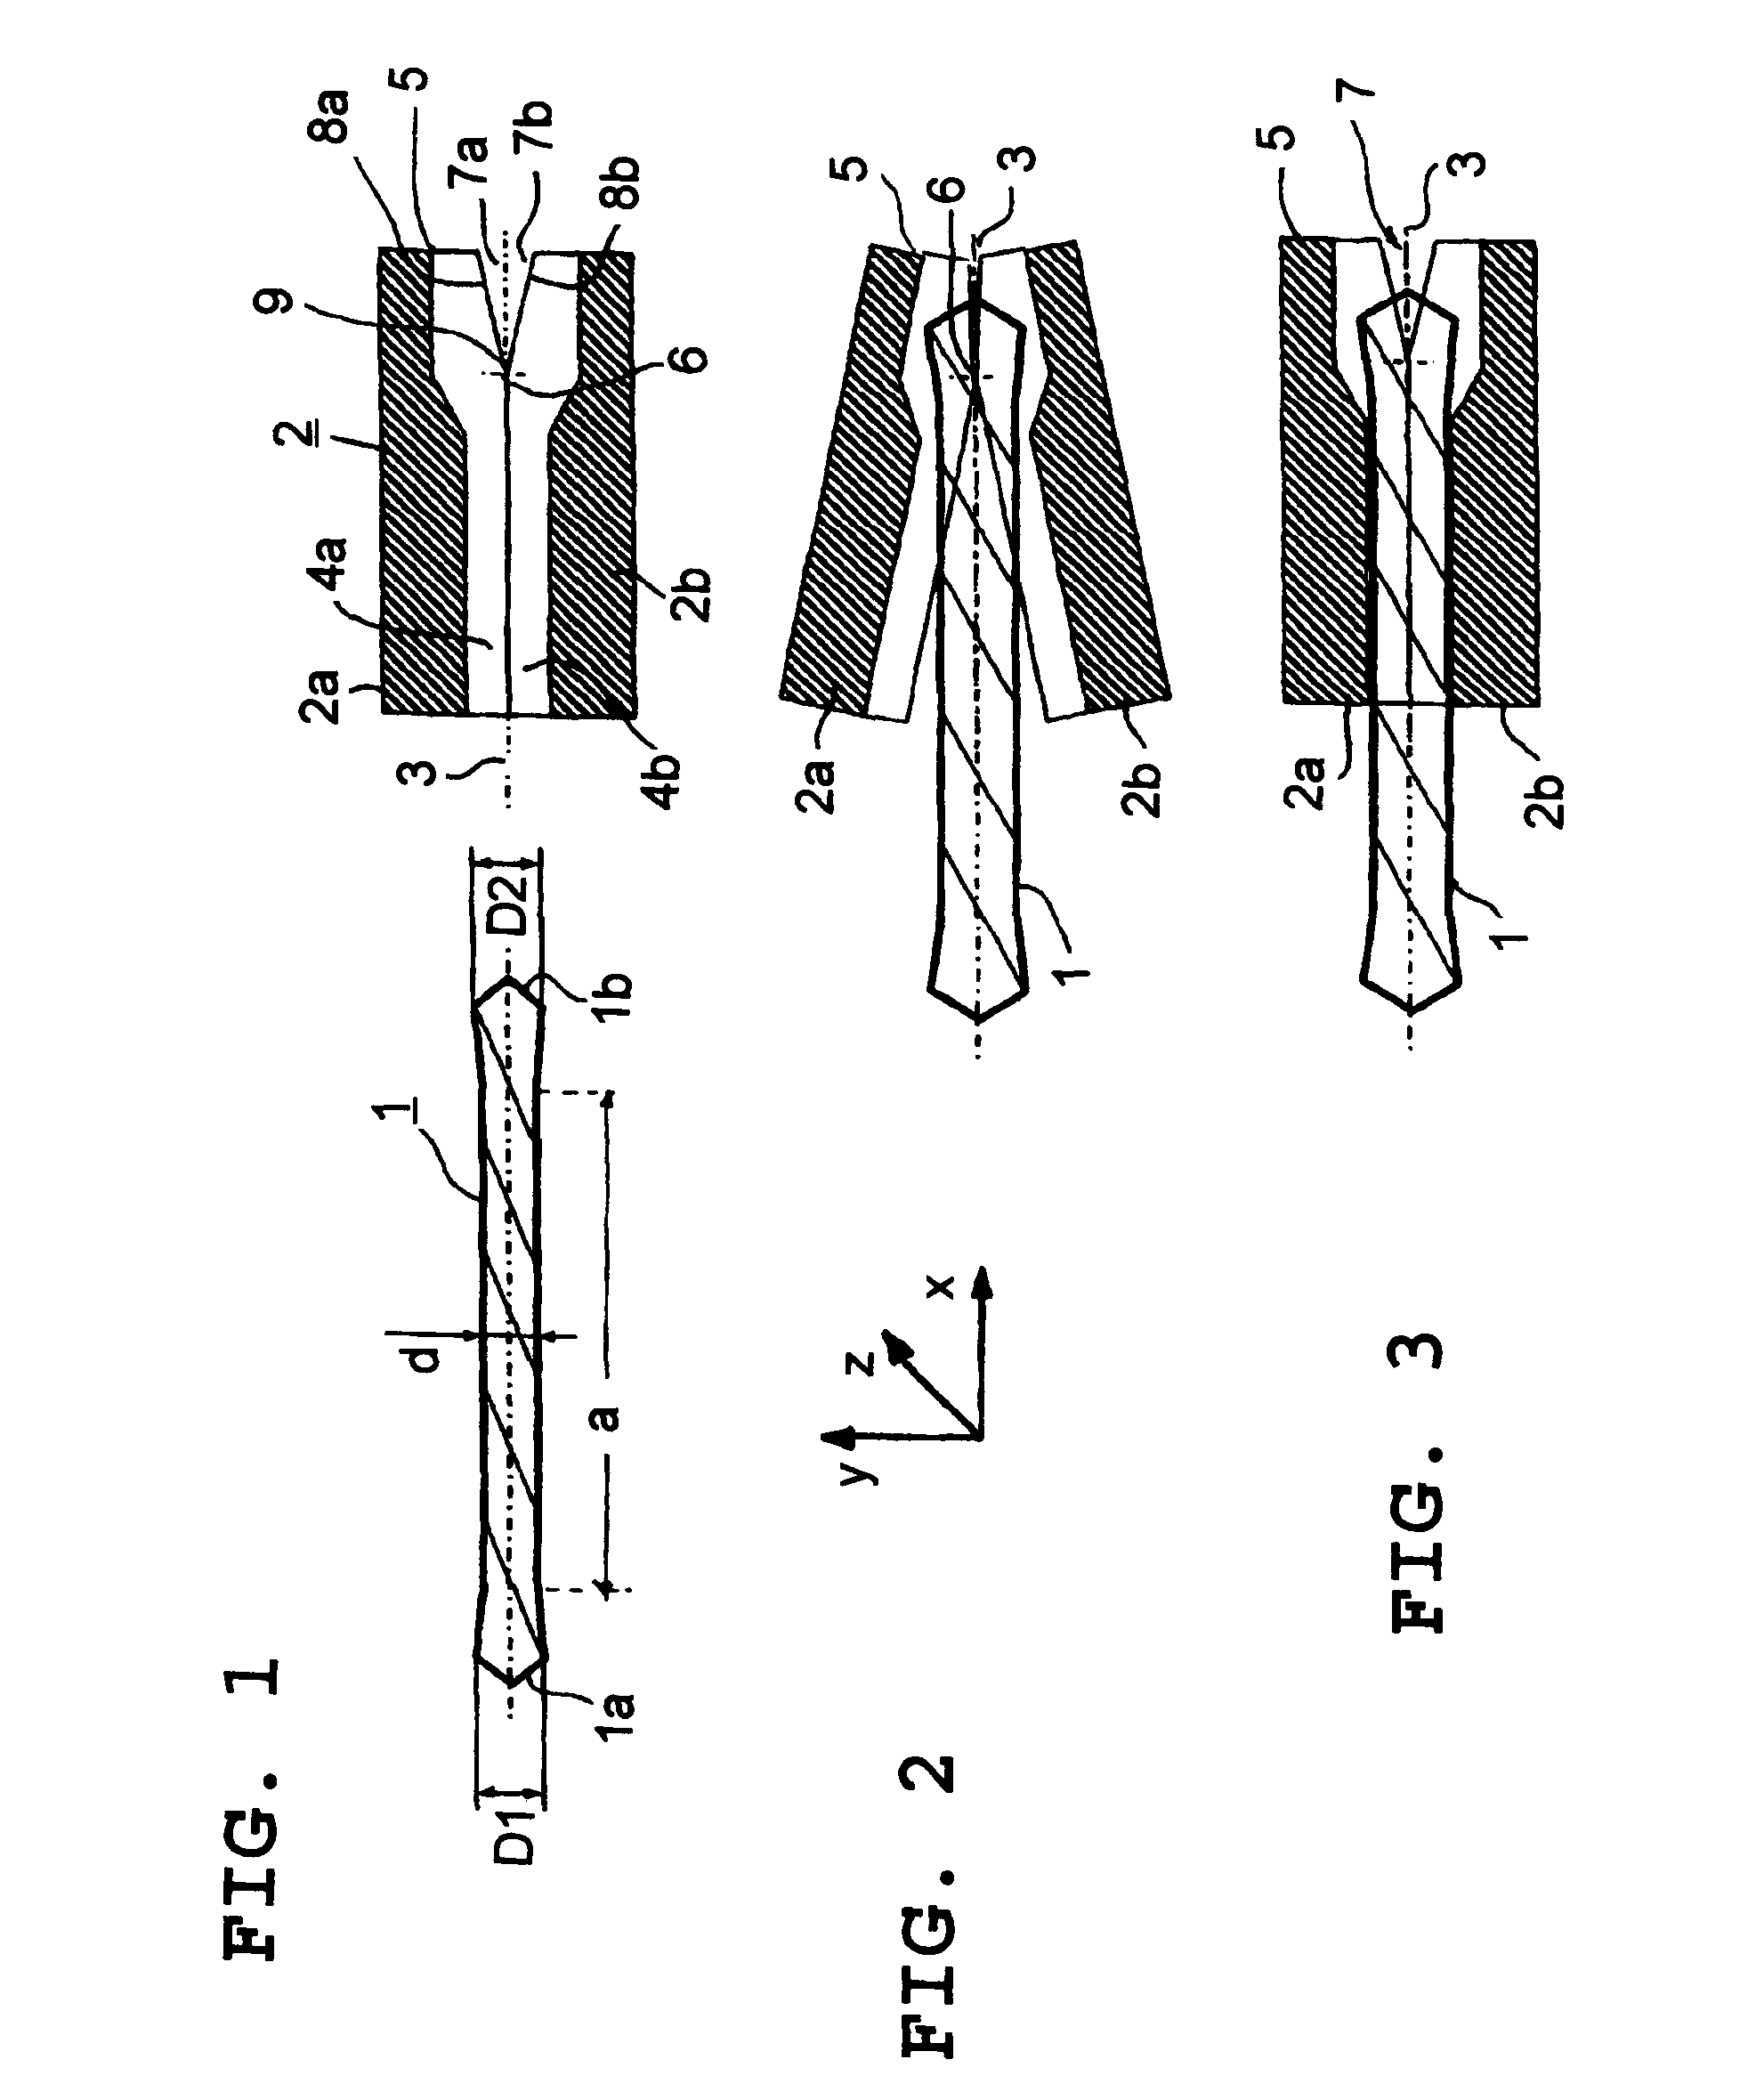 Combination of the chucking device and a drill and a chucking device for a drill with cutting tips on both ends